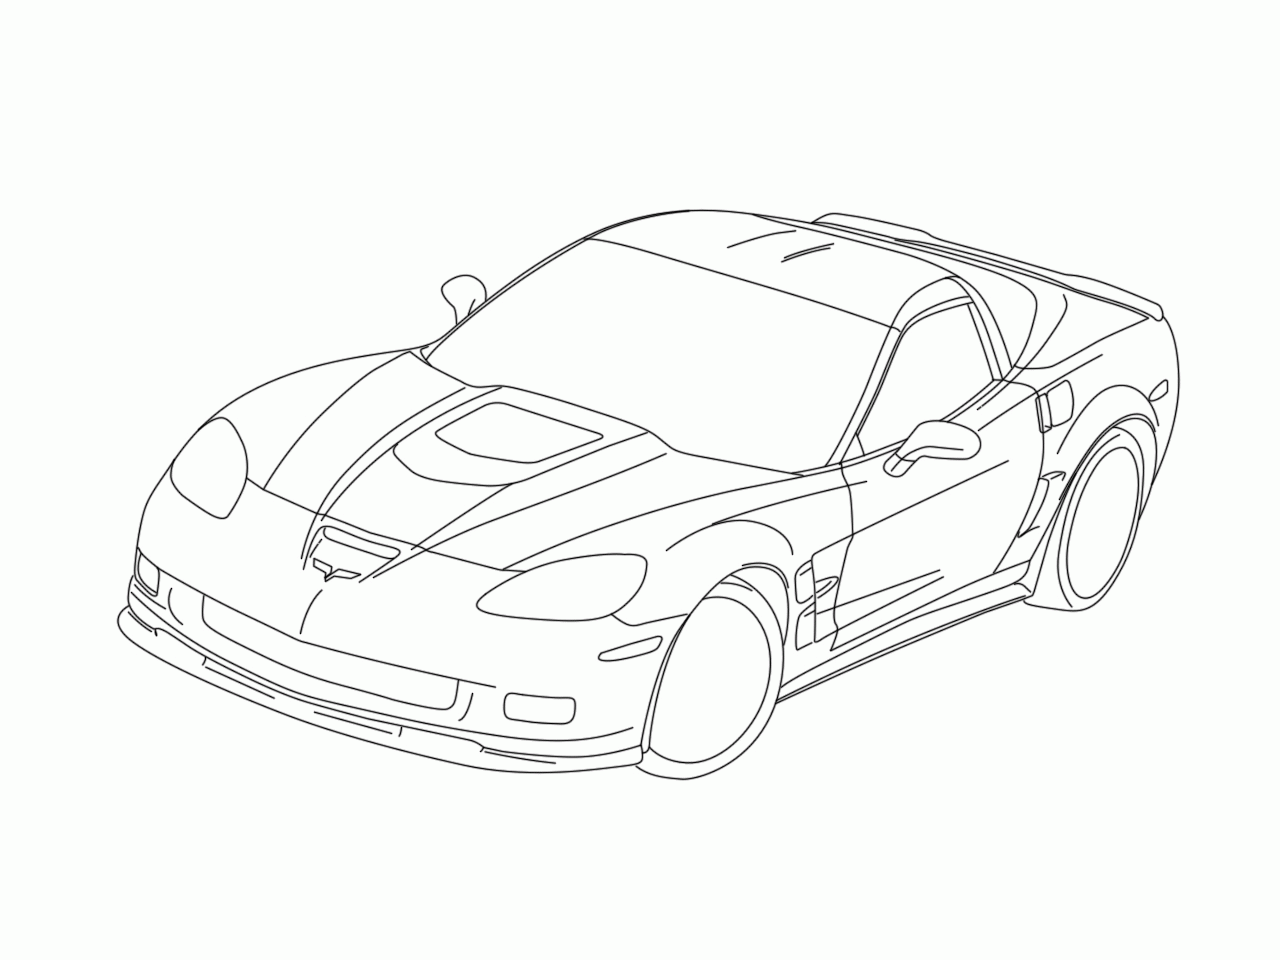 Corvette Coloring Page Coloring Home Choose from over a million free vectors, clipart graphics, vector art images, design templates, and illustrations created by artists worldwide! corvette coloring page coloring home